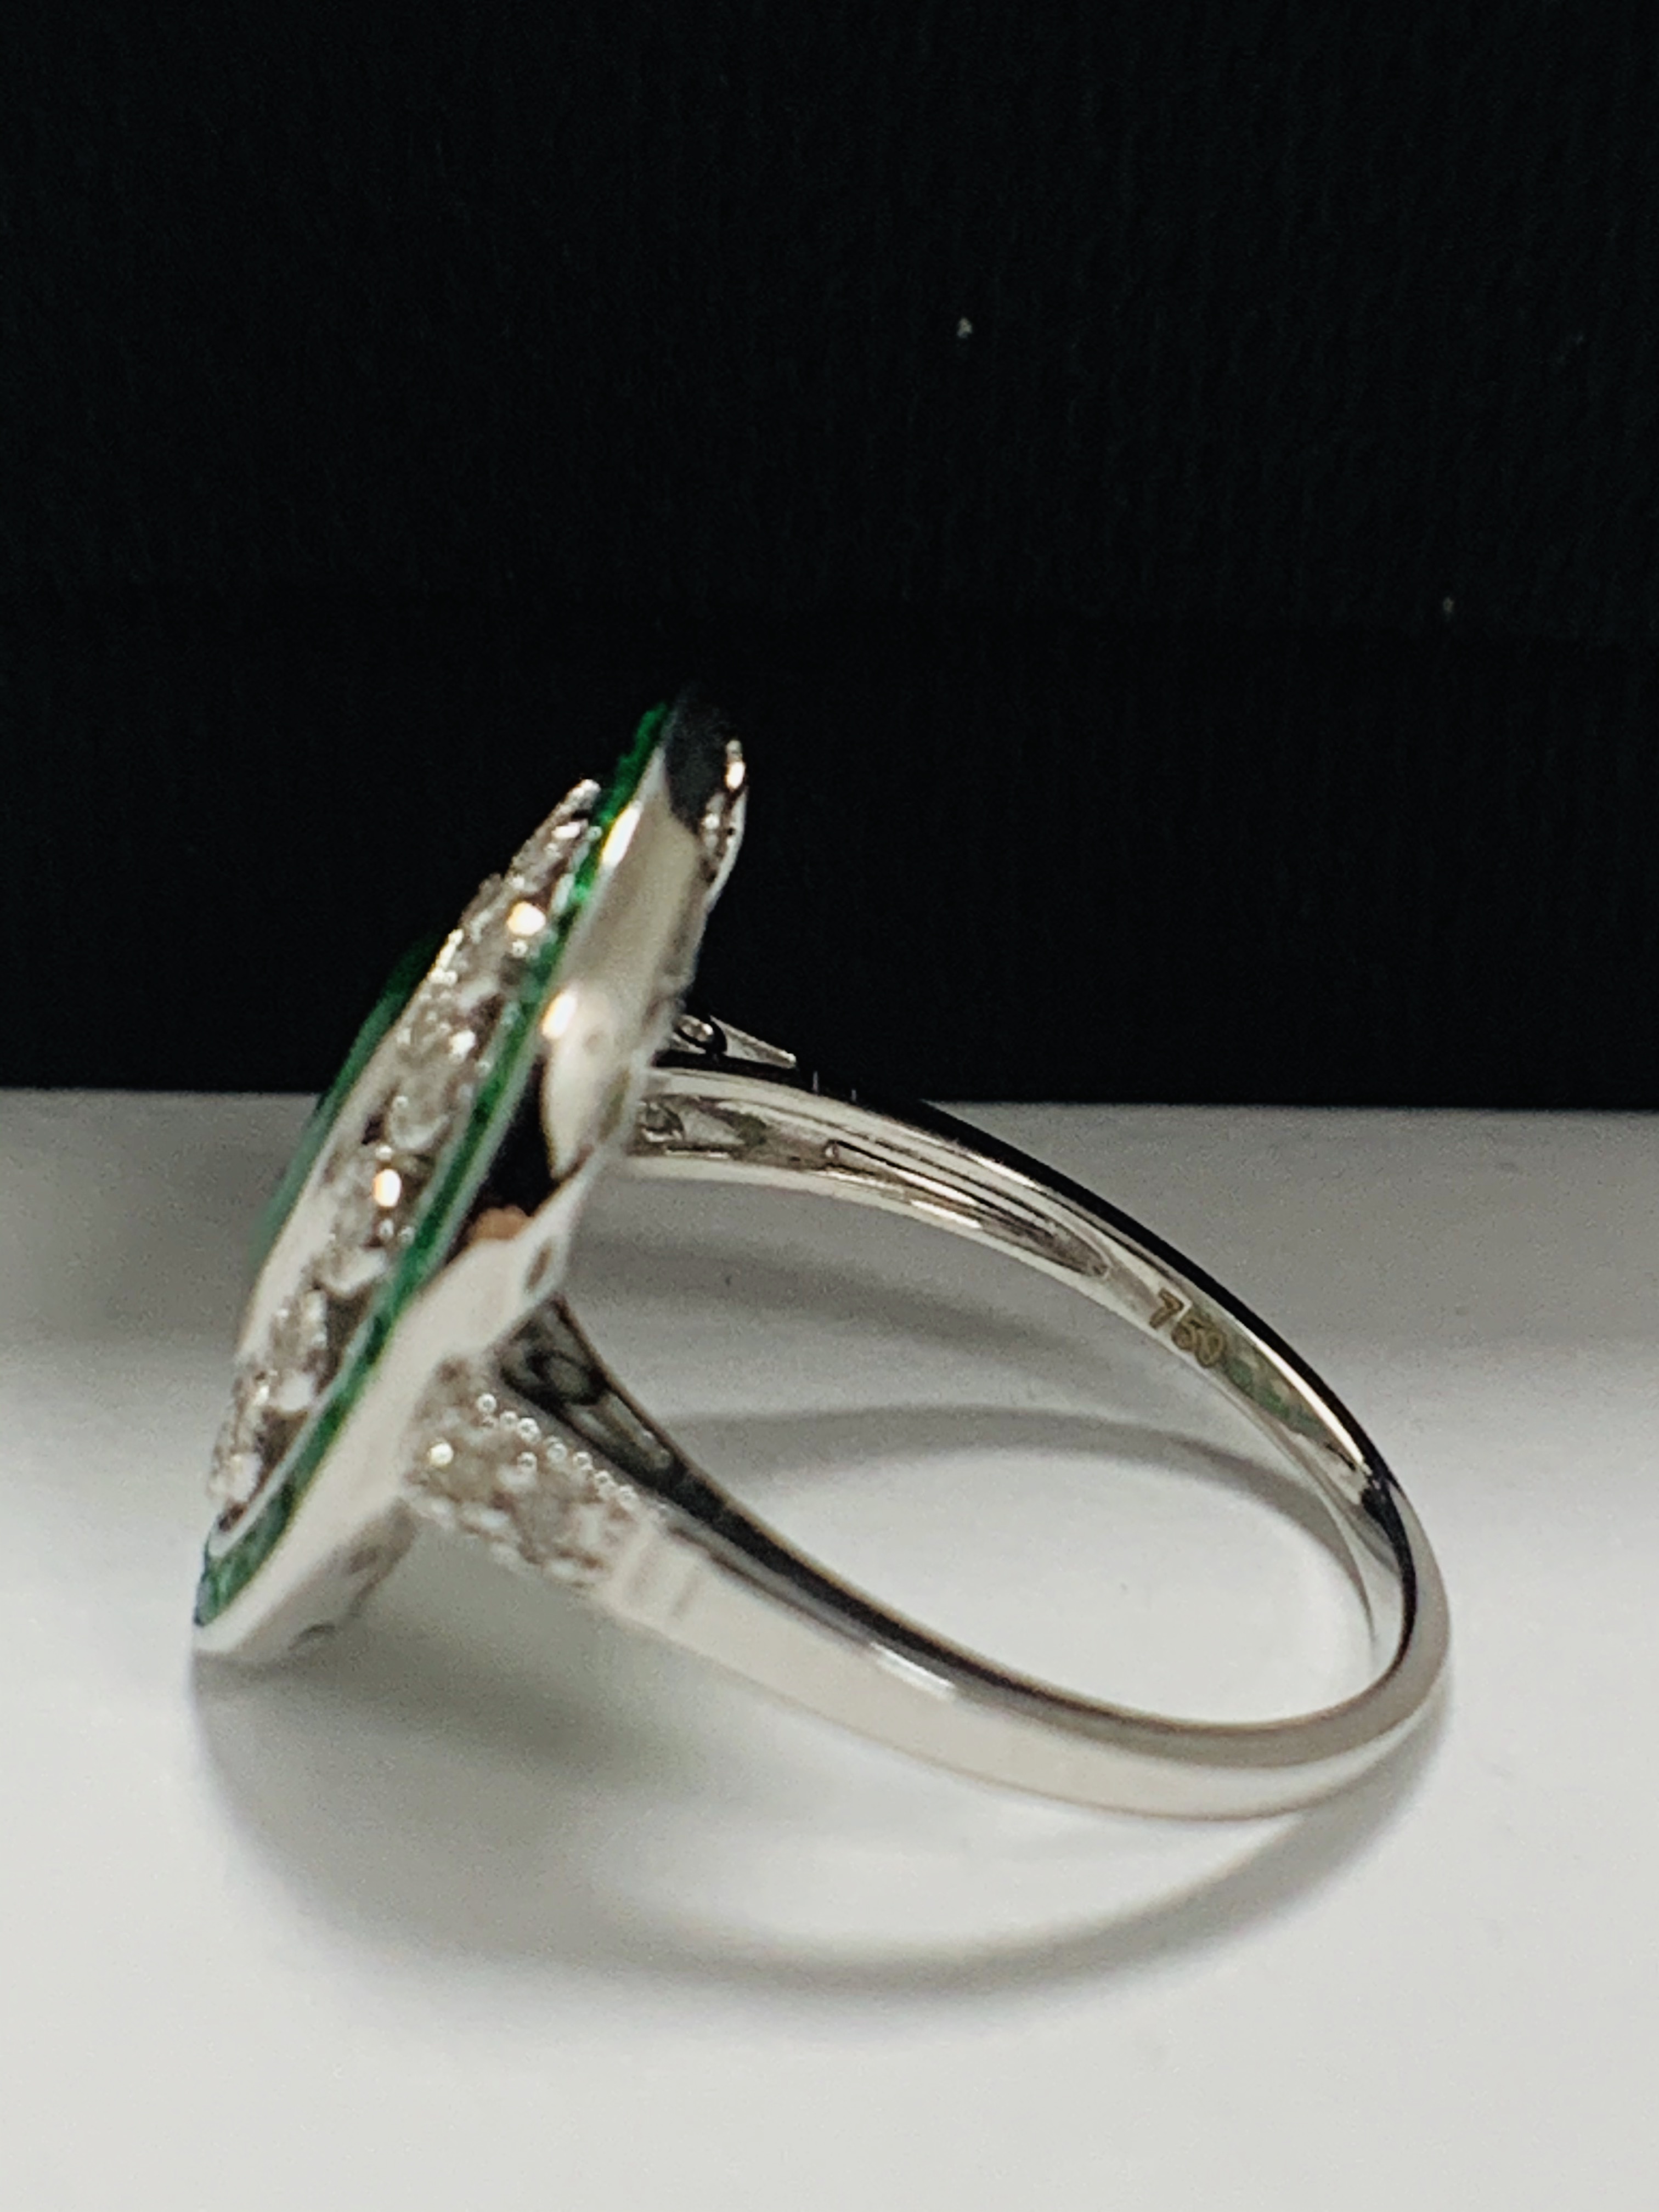 18ct White Gold Emerald and Diamond ring featuring centre, oval cut, green Emerald (2.06ct), claw se - Image 3 of 11